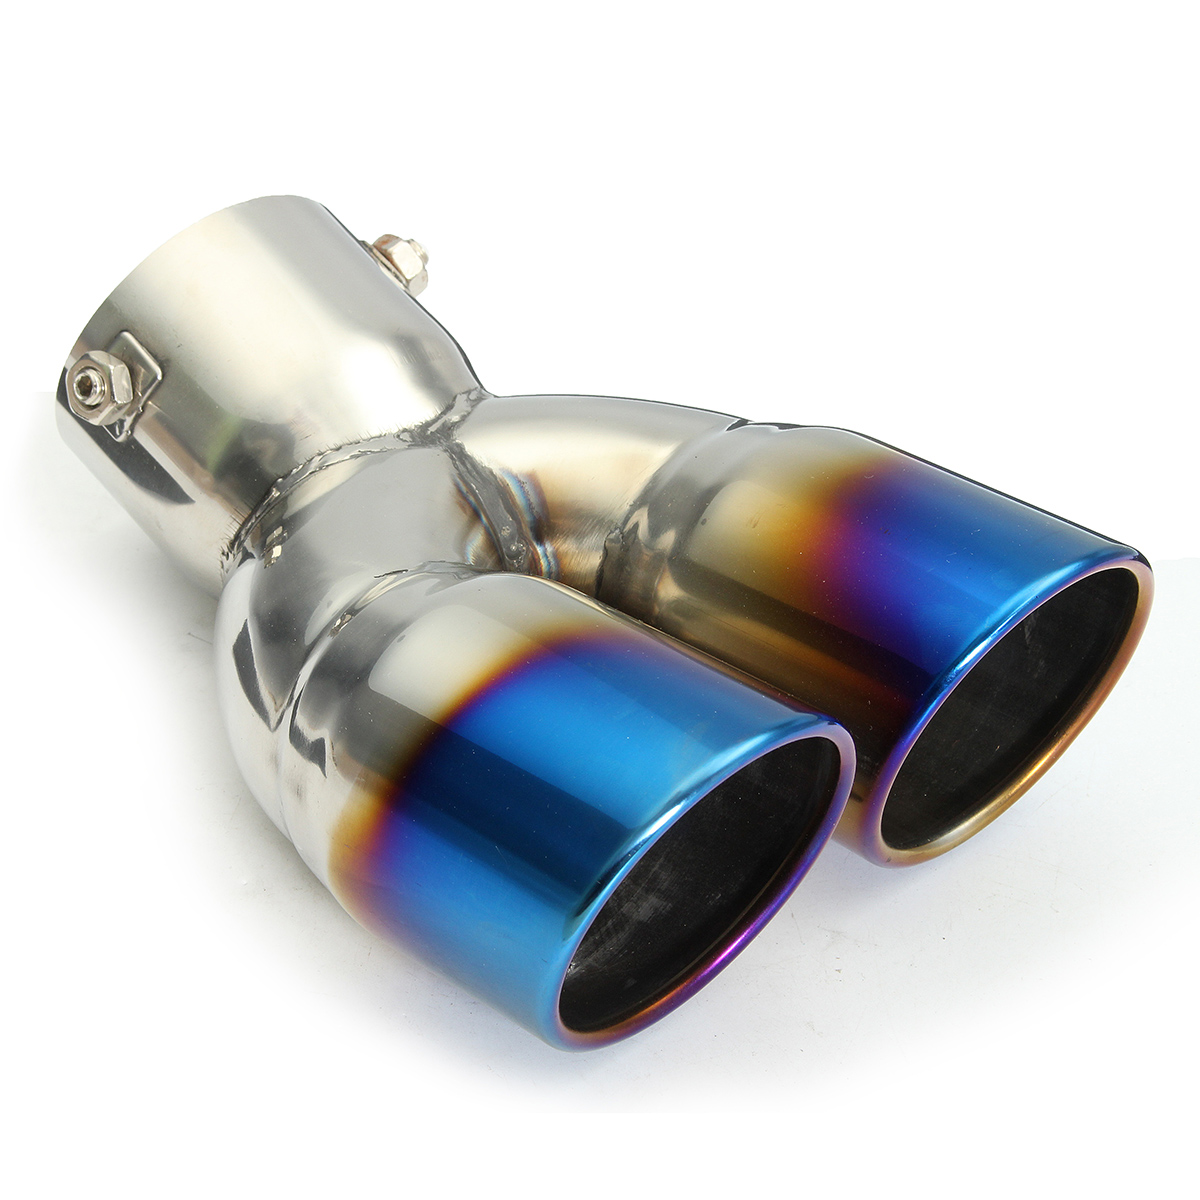 Universal Bluing Exhaust Muffler Silencer Dual Tail Pipe Tips 58-70Mm Inlet